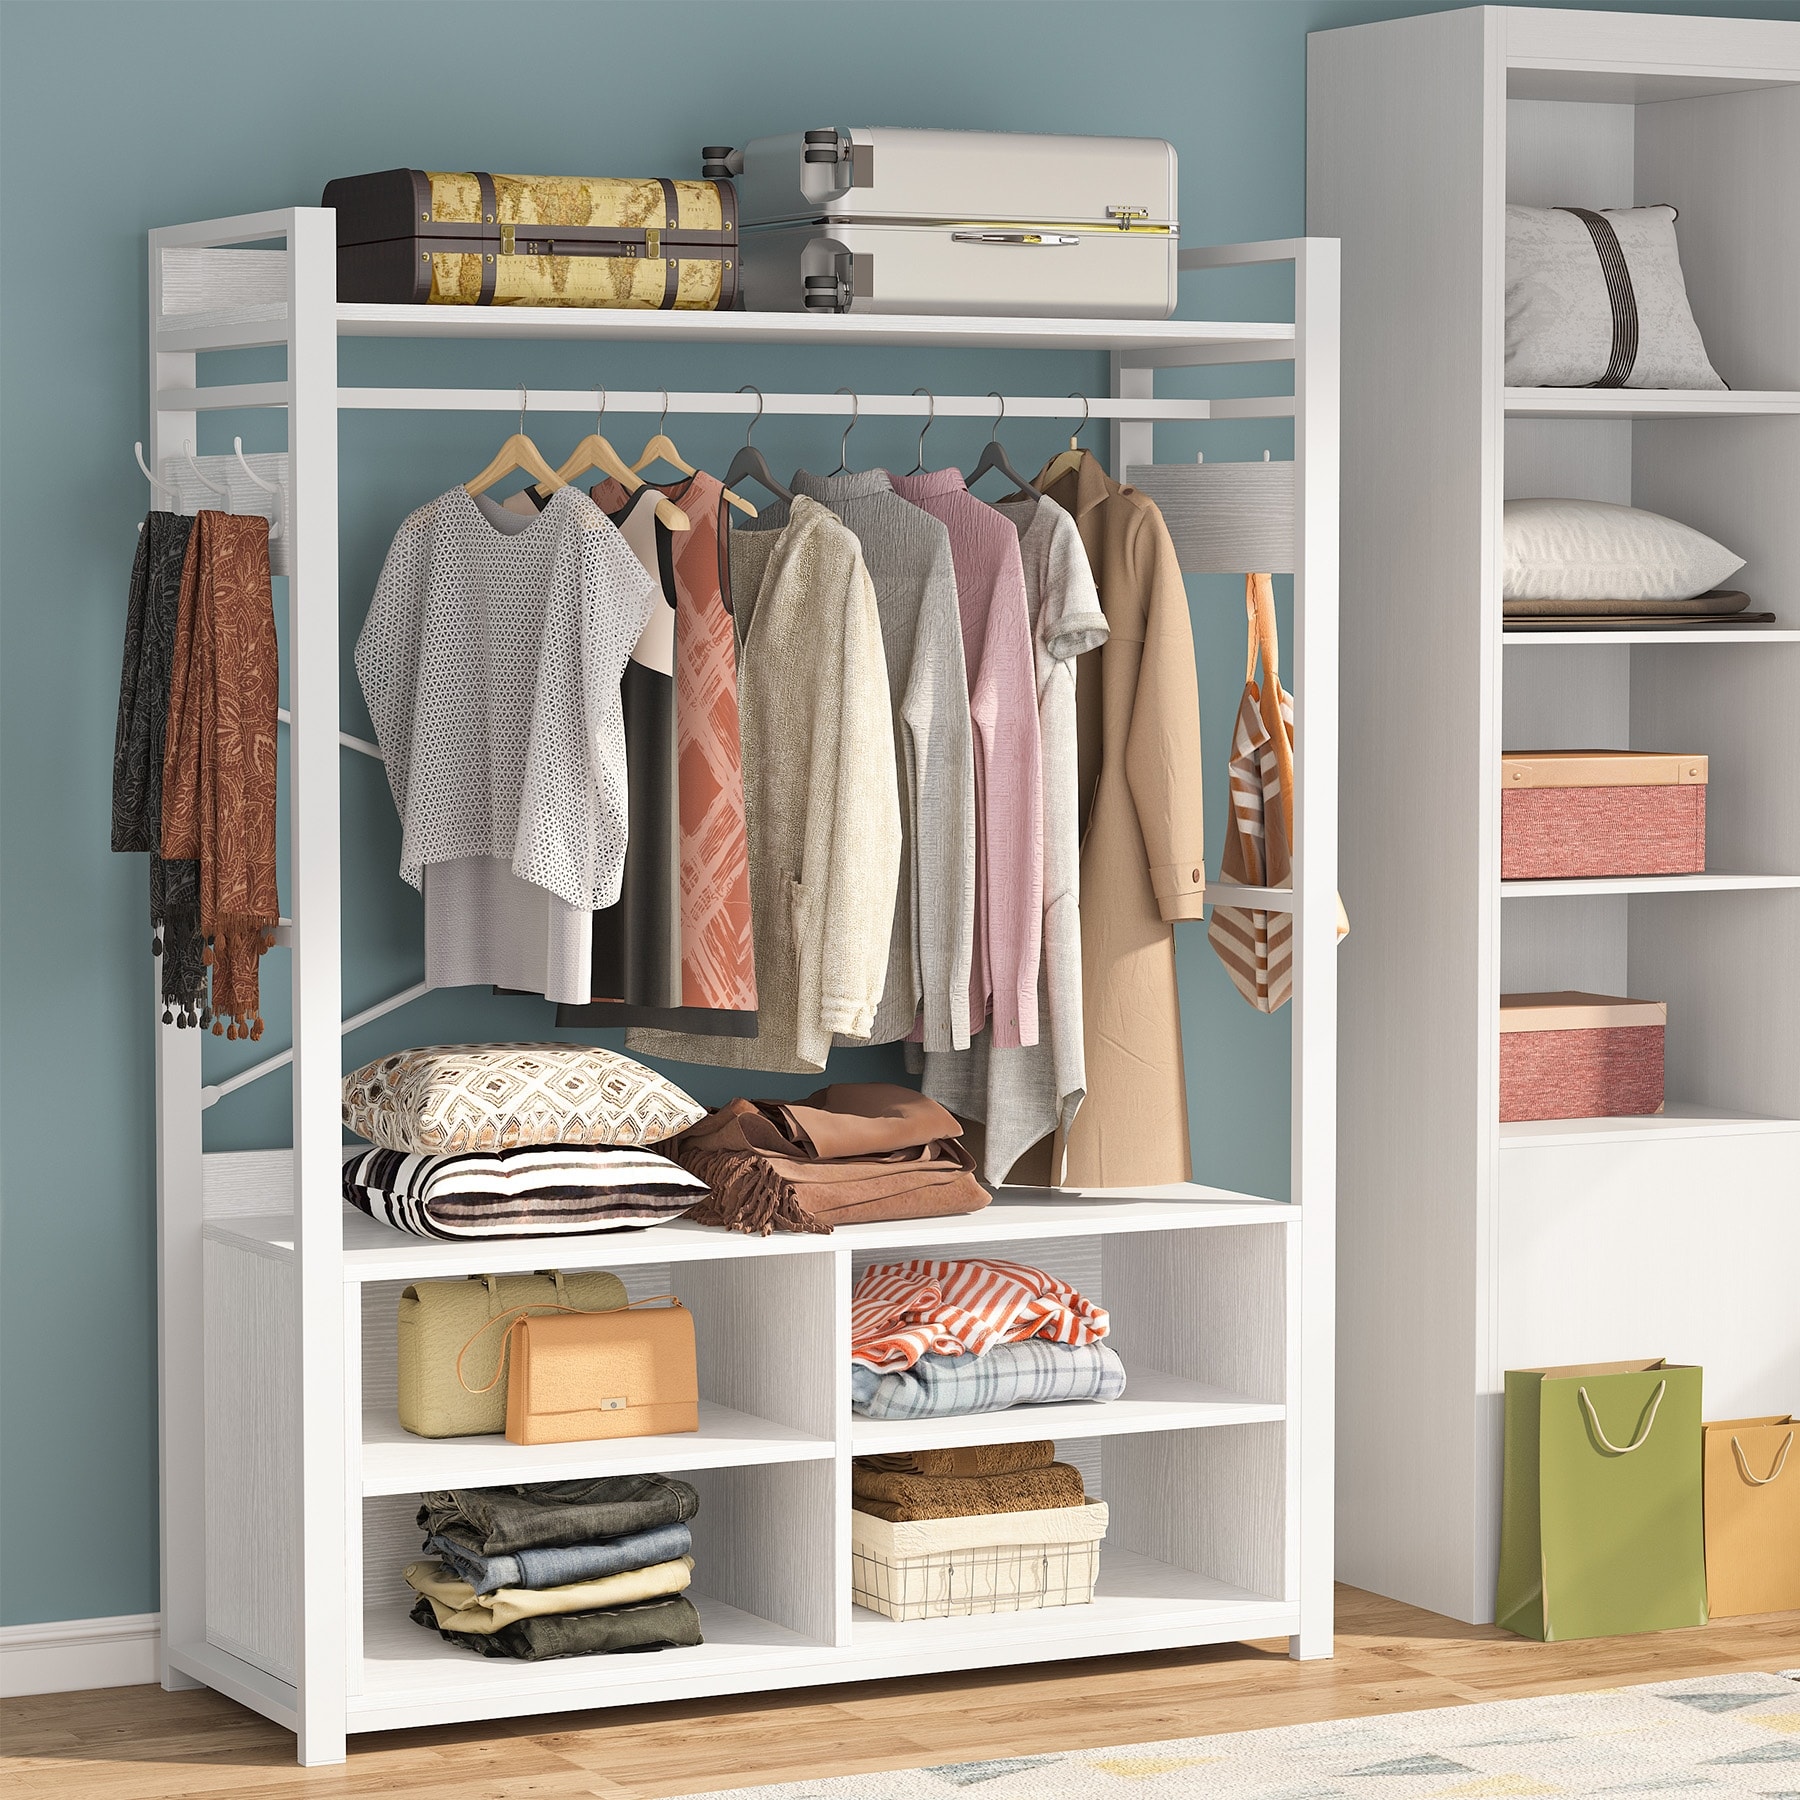 https://ak1.ostkcdn.com/images/products/is/images/direct/d3723b55f747ec6f7bee84e72f1986fc7803619a/Metal-Wood-Free-standing-Closet-Clothing-Rack-Closet-Organizer-System-with-Shelves-Clothes-Garment-Rack-Shelving-for-Bedroom.jpg